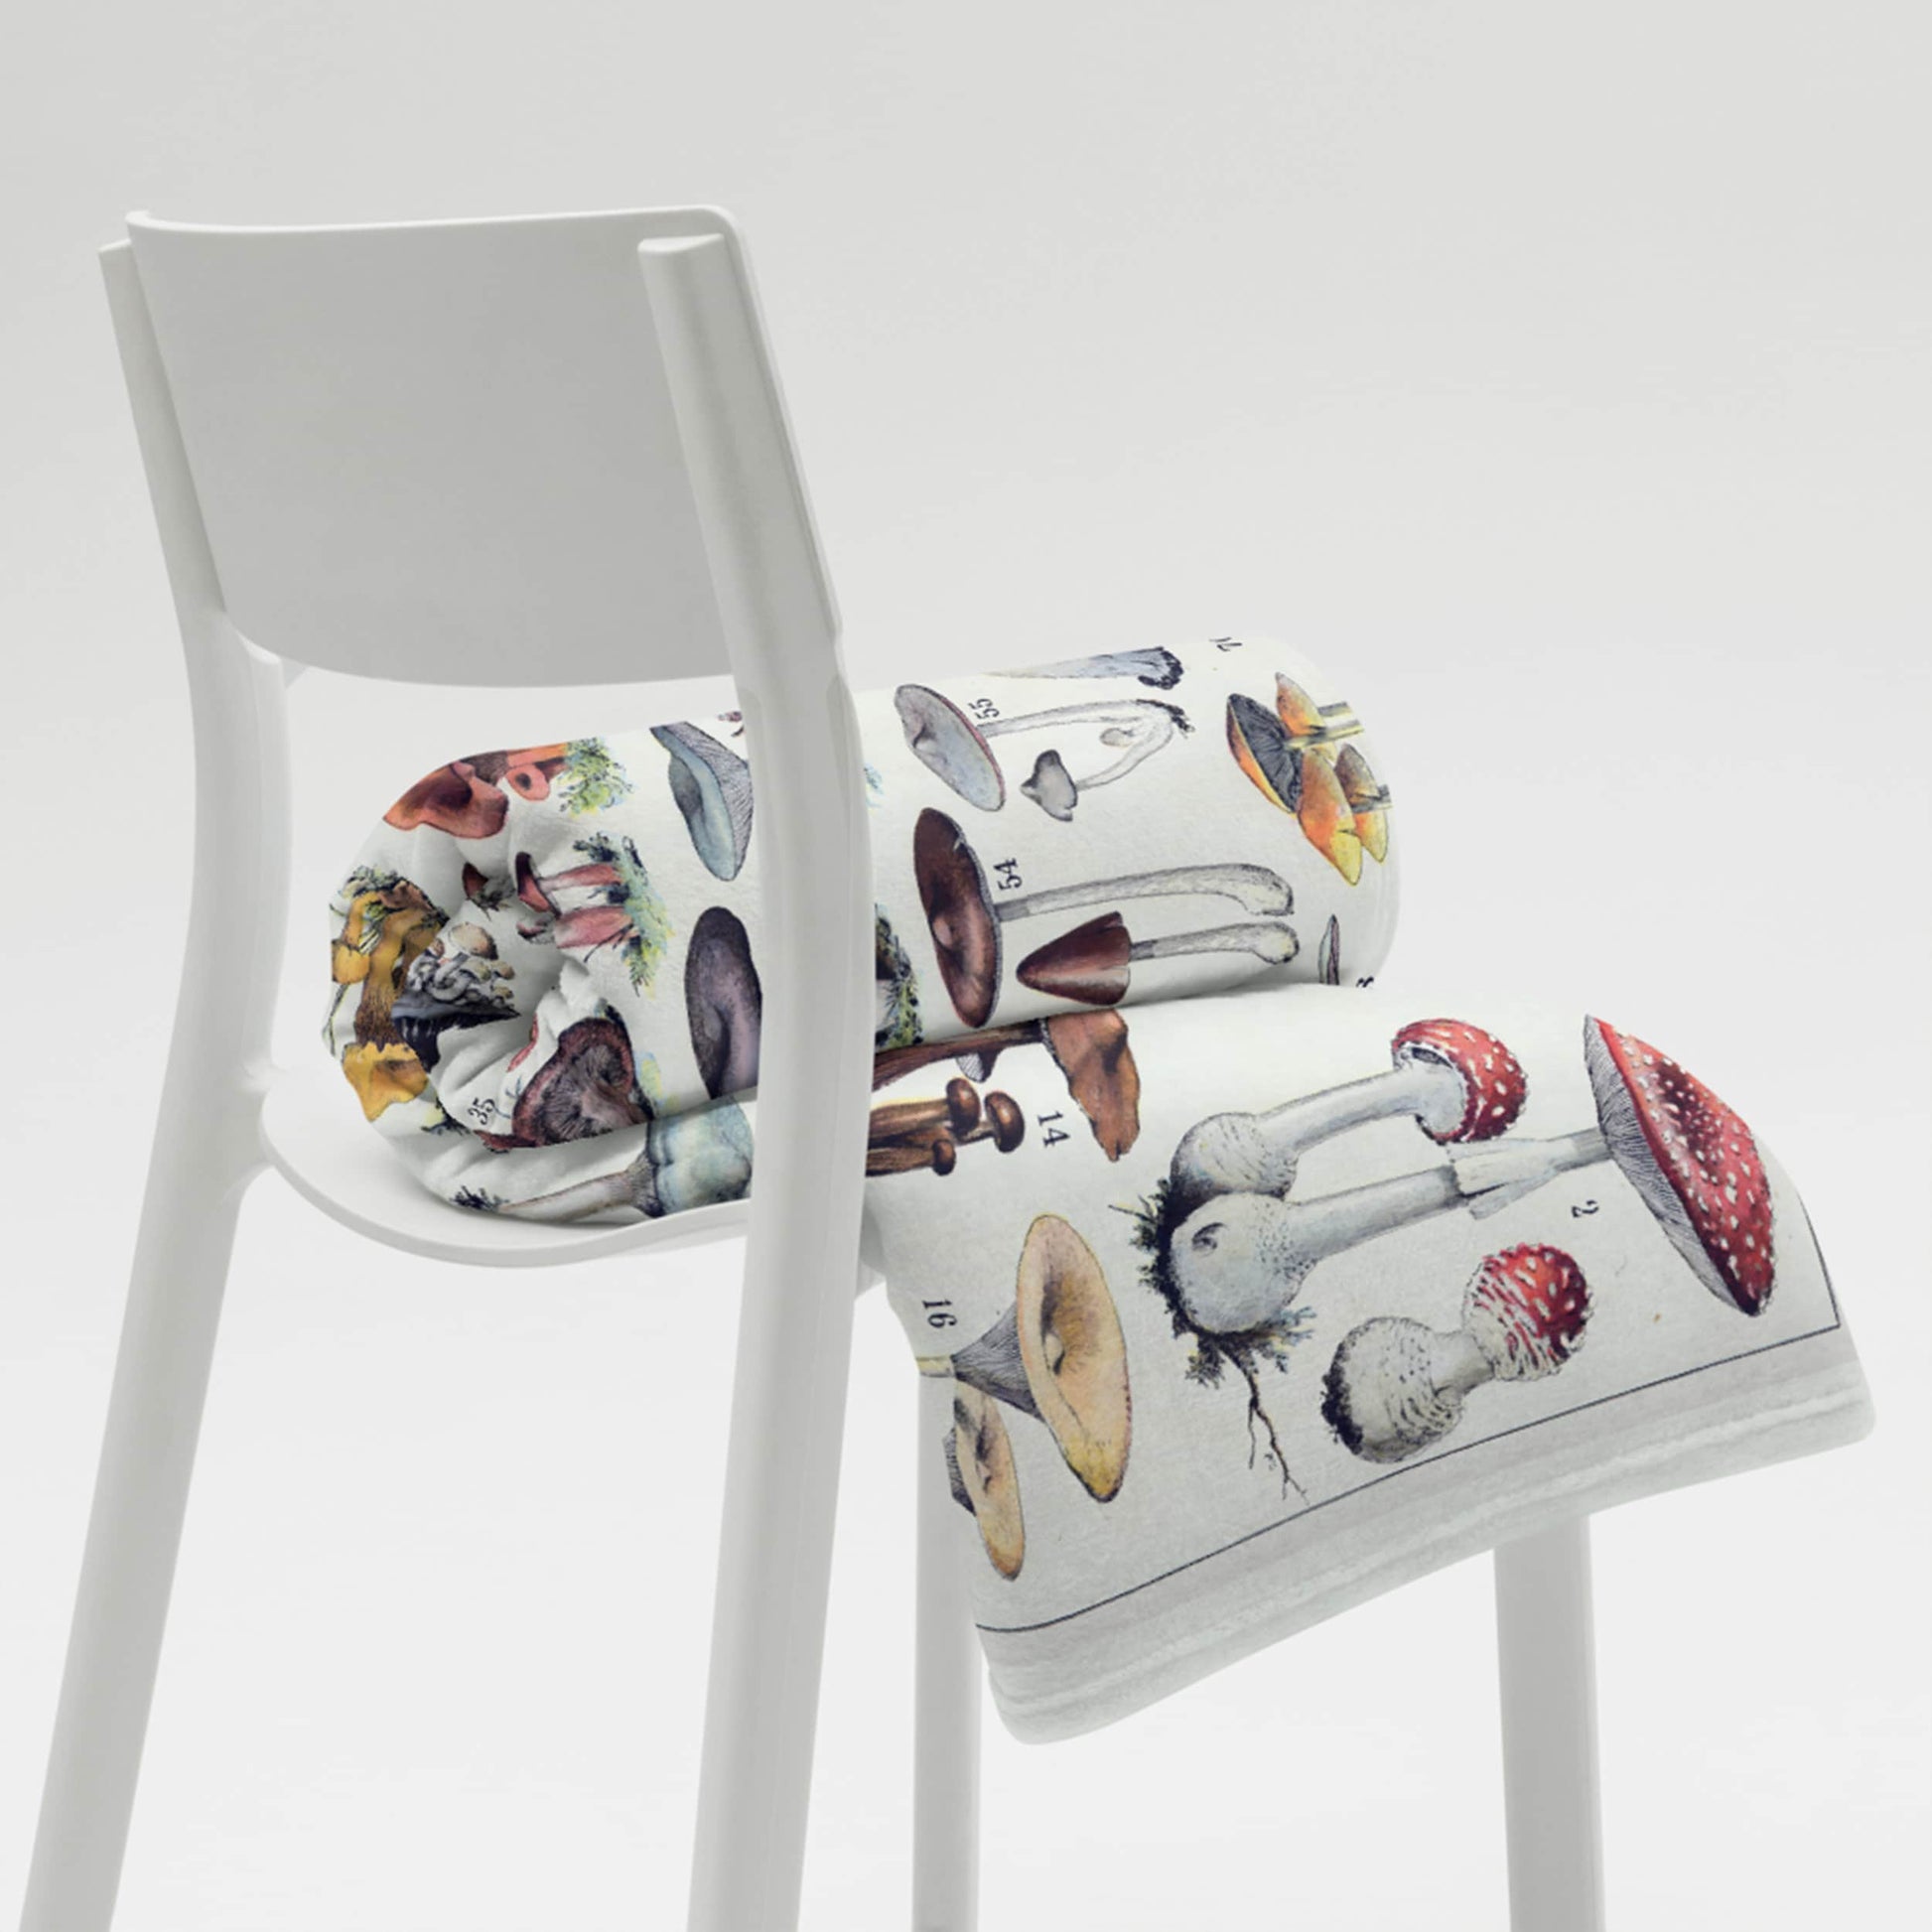 A modern white chair presenting a rolled-up fleece blanket with a detailed, colorful print of various mushrooms, juxtaposing contemporary furniture design with naturalistic elements